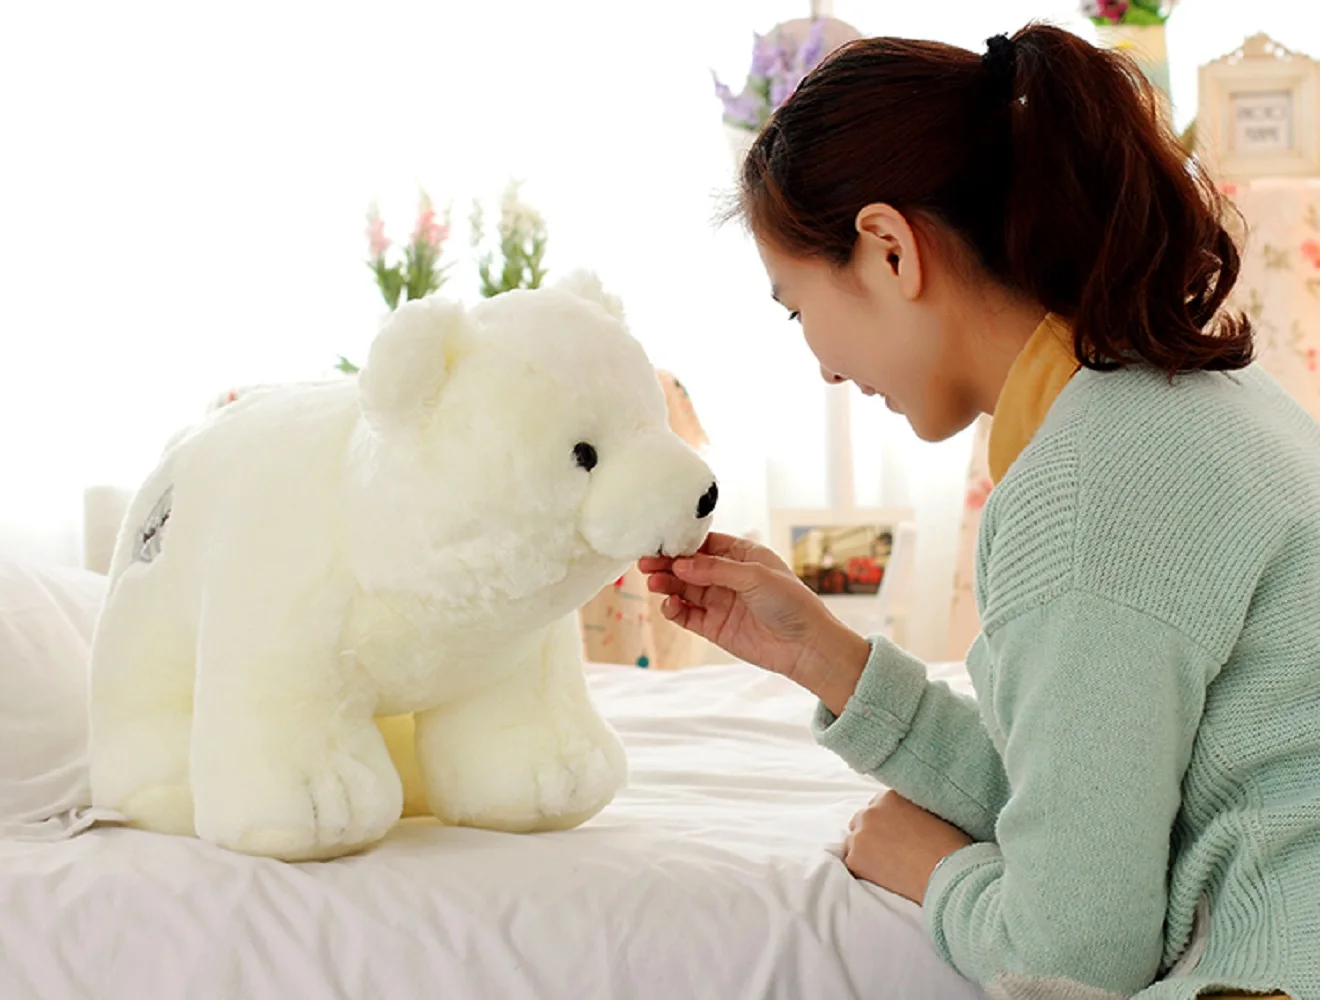 

The lovely bear doll plush standing bear toy The polar bear pillow birthday gift about 45cm